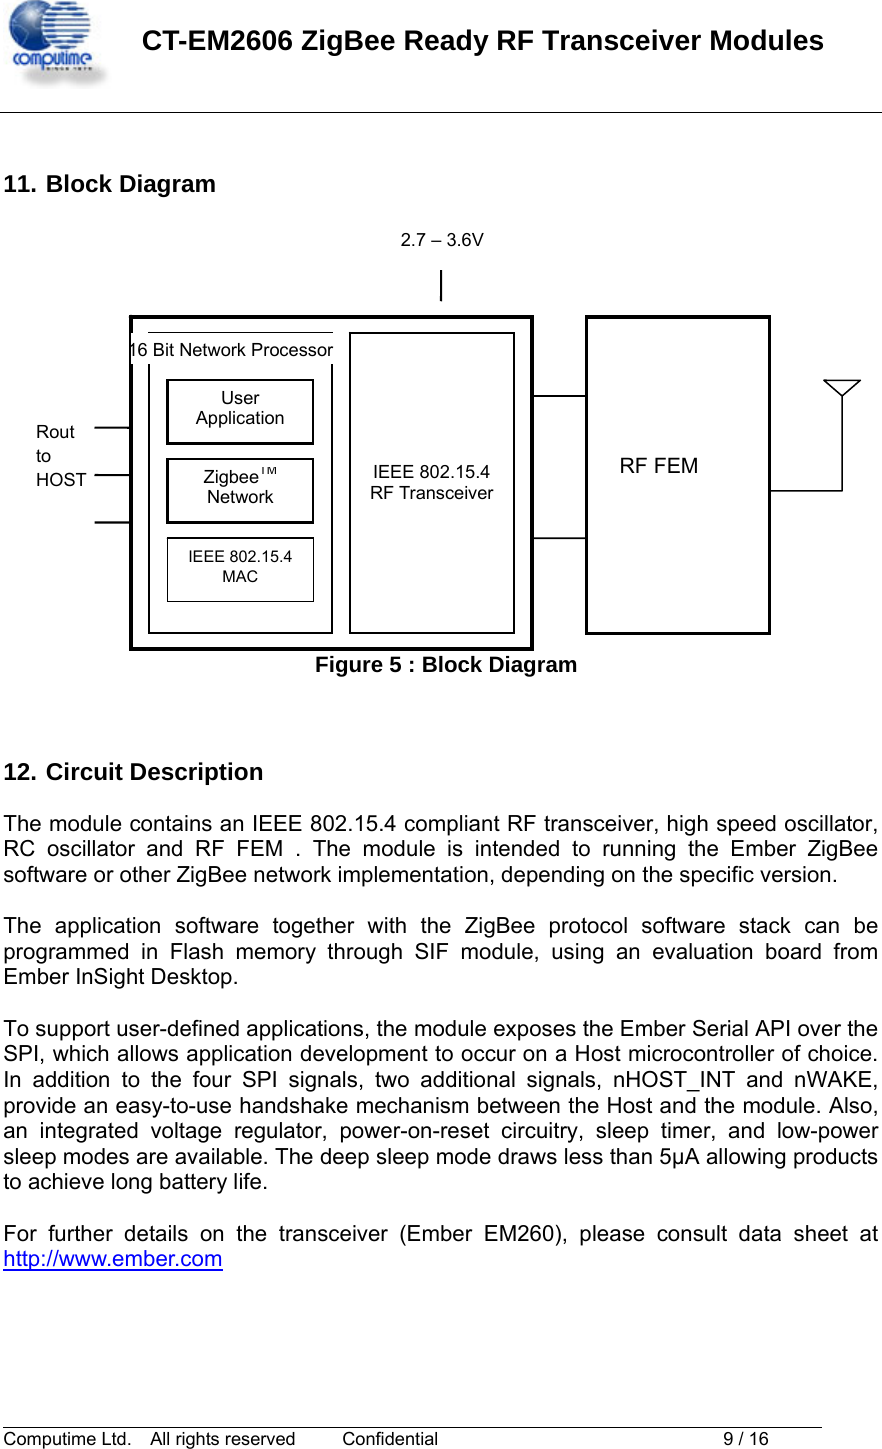  CT-EM2606 ZigBee Ready RF Transceiver Modules                                                                                Computime Ltd.    All rights reserved   Confidential              9 / 16    11. Block Diagram   Figure 5 : Block Diagram   12. Circuit Description The module contains an IEEE 802.15.4 compliant RF transceiver, high speed oscillator, RC oscillator and RF FEM . The module is intended to running the Ember ZigBee software or other ZigBee network implementation, depending on the specific version.  The application software together with the ZigBee protocol software stack can be programmed in Flash memory through SIF module, using an evaluation board from Ember InSight Desktop.  To support user-defined applications, the module exposes the Ember Serial API over the SPI, which allows application development to occur on a Host microcontroller of choice. In addition to the four SPI signals, two additional signals, nHOST_INT and nWAKE, provide an easy-to-use handshake mechanism between the Host and the module. Also, an integrated voltage regulator, power-on-reset circuitry, sleep timer, and low-power sleep modes are available. The deep sleep mode draws less than 5μA allowing products to achieve long battery life.  For further details on the transceiver (Ember EM260), please consult data sheet at http://www.ember.com    Rout   to  HOST   16 Bit Network ProcessorUser Application ZigbeeTM Network IEEE 802.15.4 MAC       IEEE 802.15.4 RF Transceiver 2.7 – 3.6V     RF FEM      